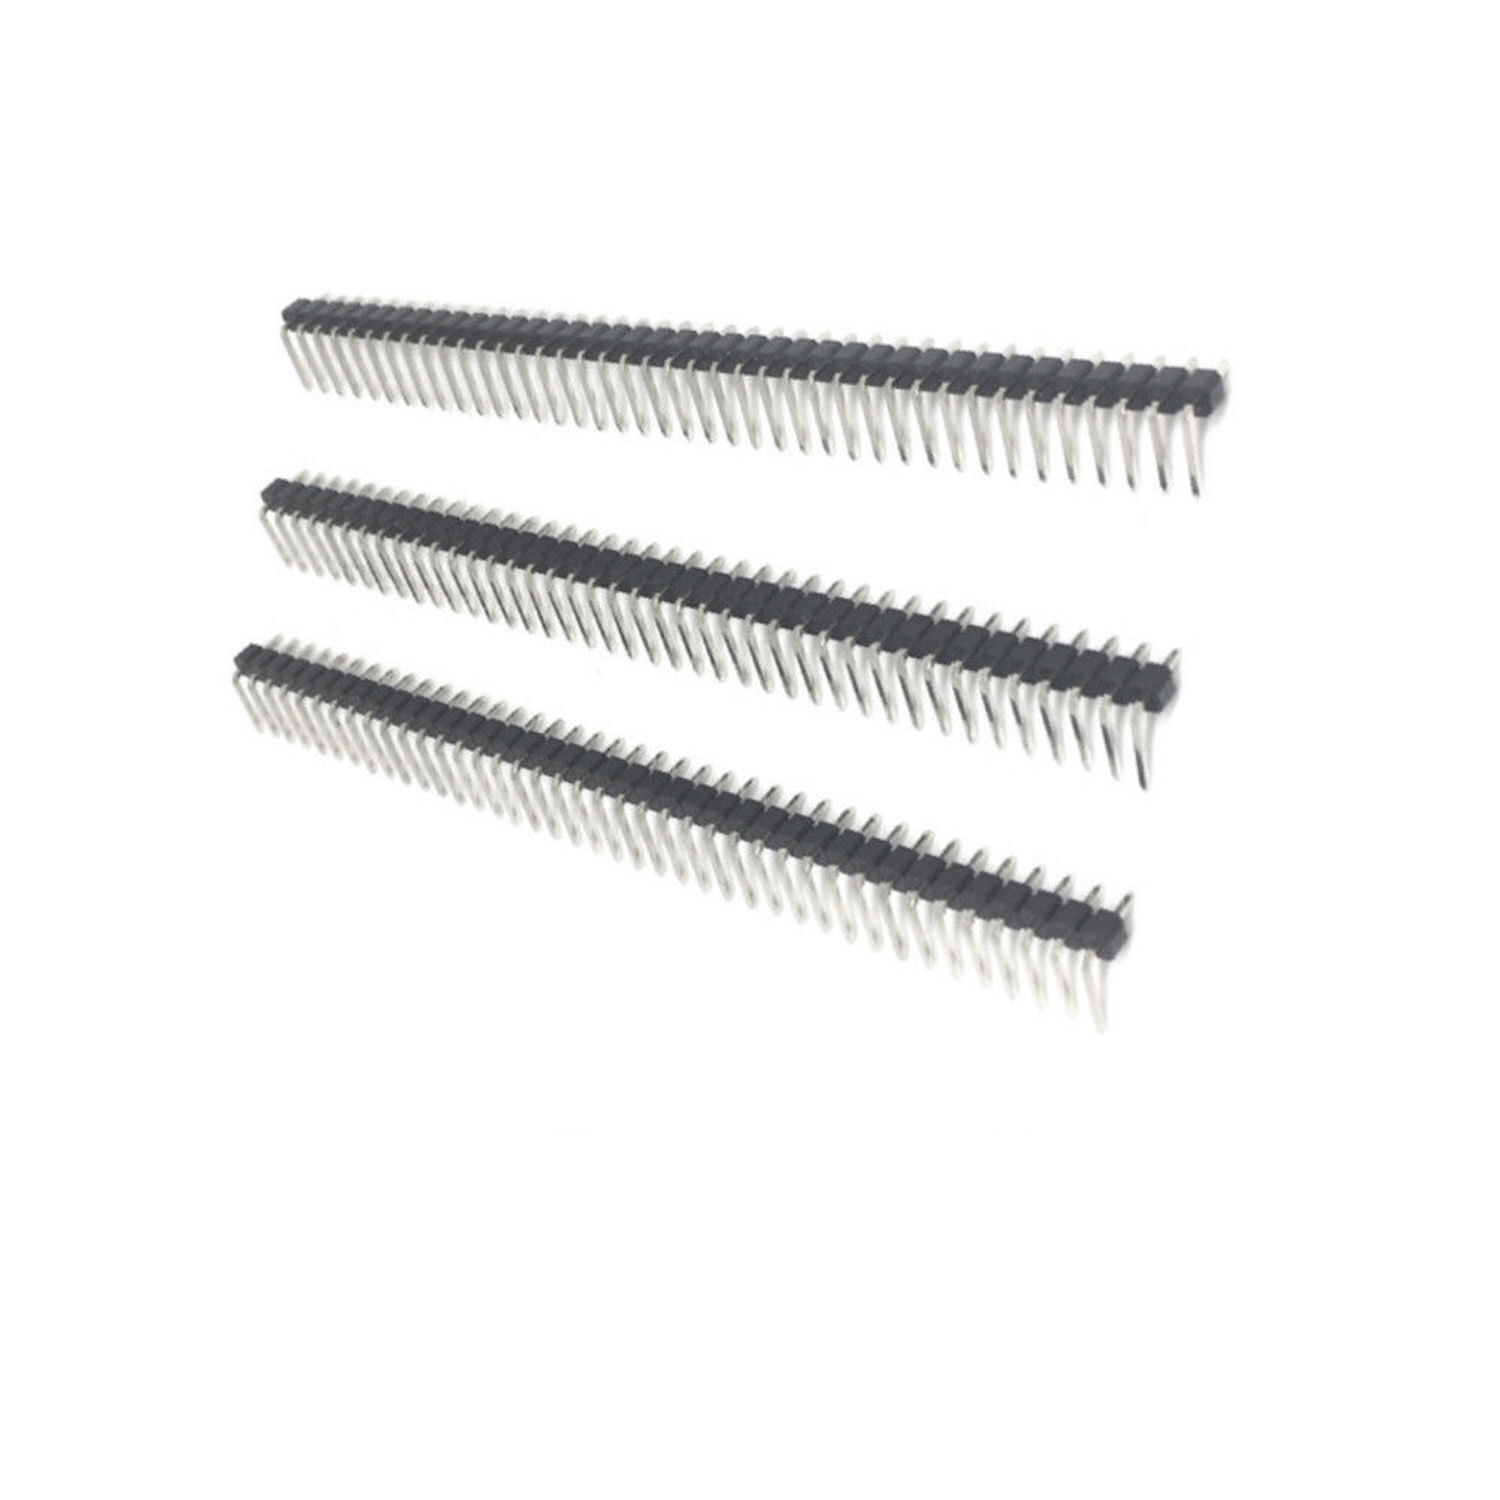 [10x] 1x40 Pin 2.54mm Right Angle Single Row Male Pin Header Connector - 90 deg Generic Does Not Apply - фотография #8